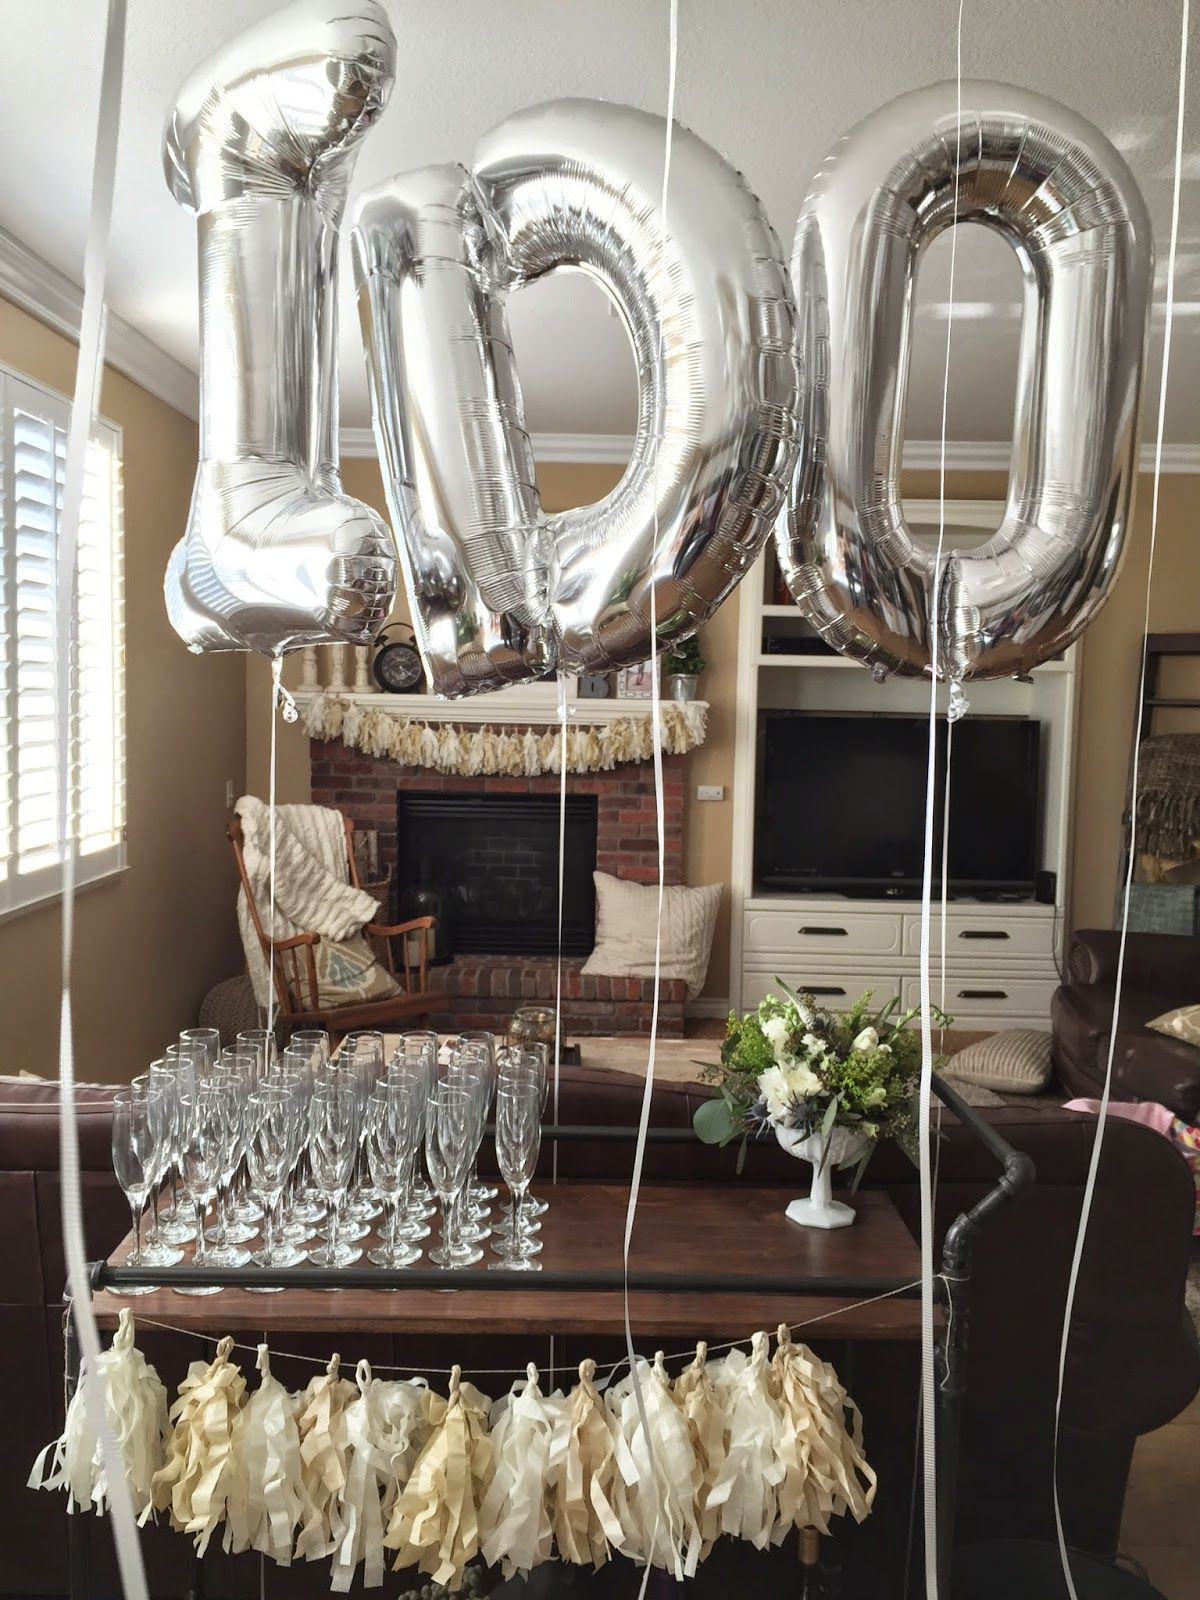 Pinterest Engagement Party Ideas
 Gold silver and white engagement party